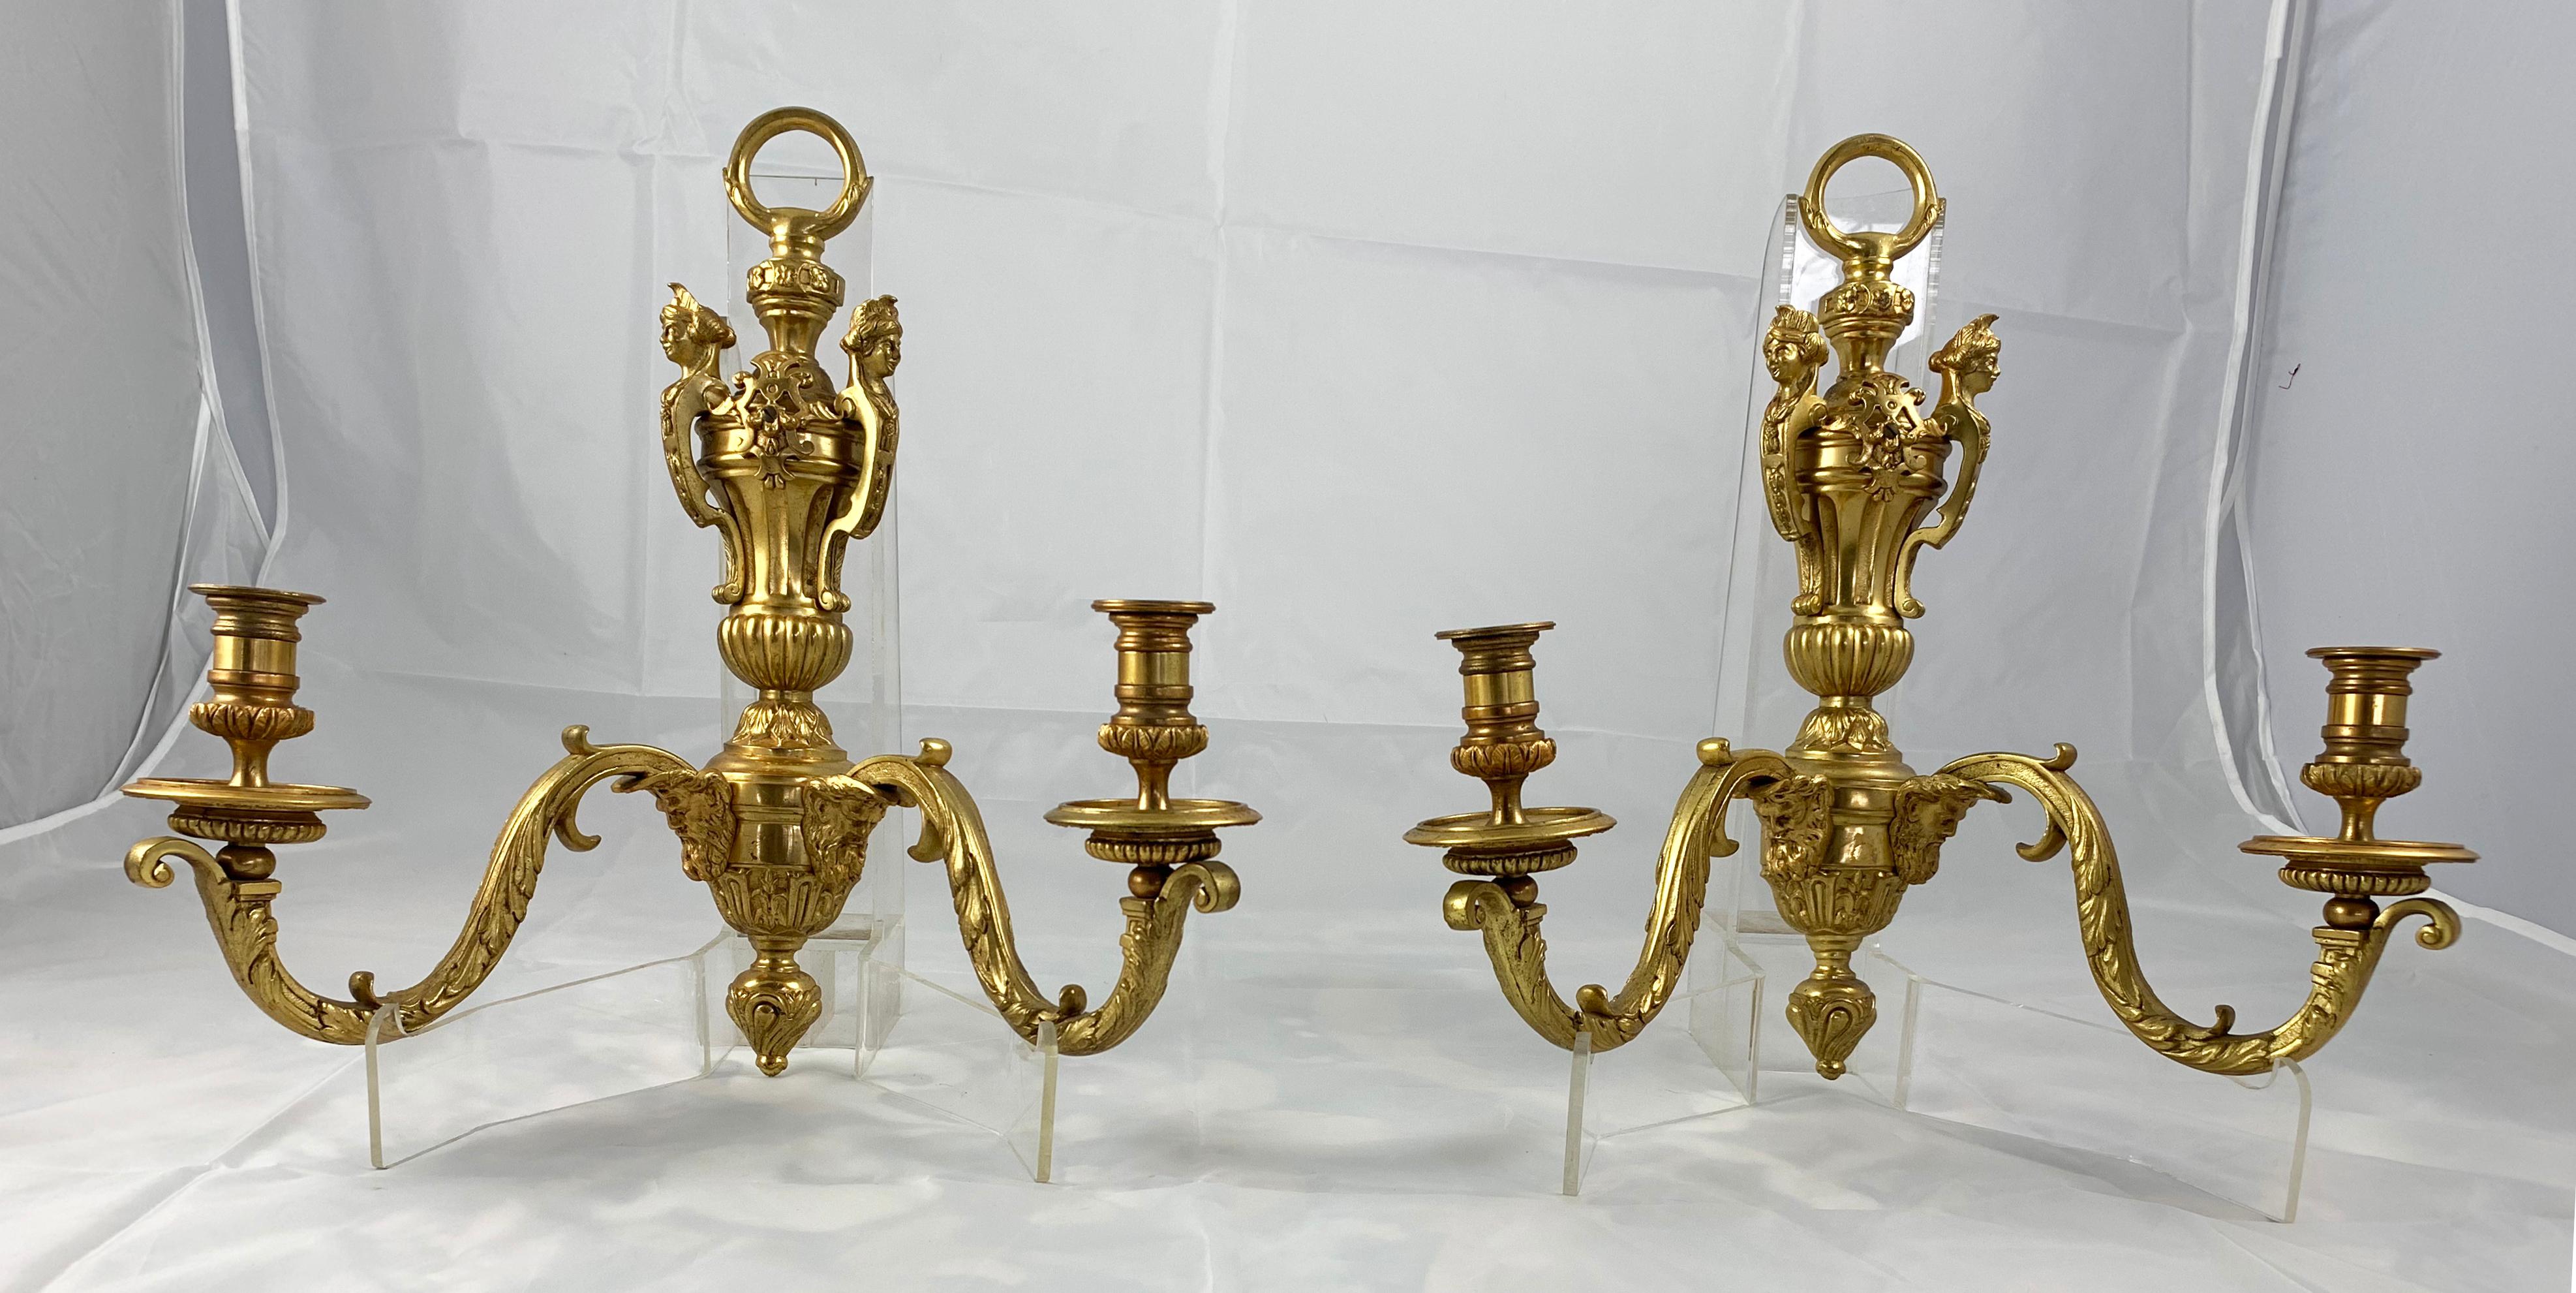 A Fine Pair of Ormolu two branch wall light, circa 1900. Each with cast foliate decoration applied with classical figures. Spool shaped sconces.